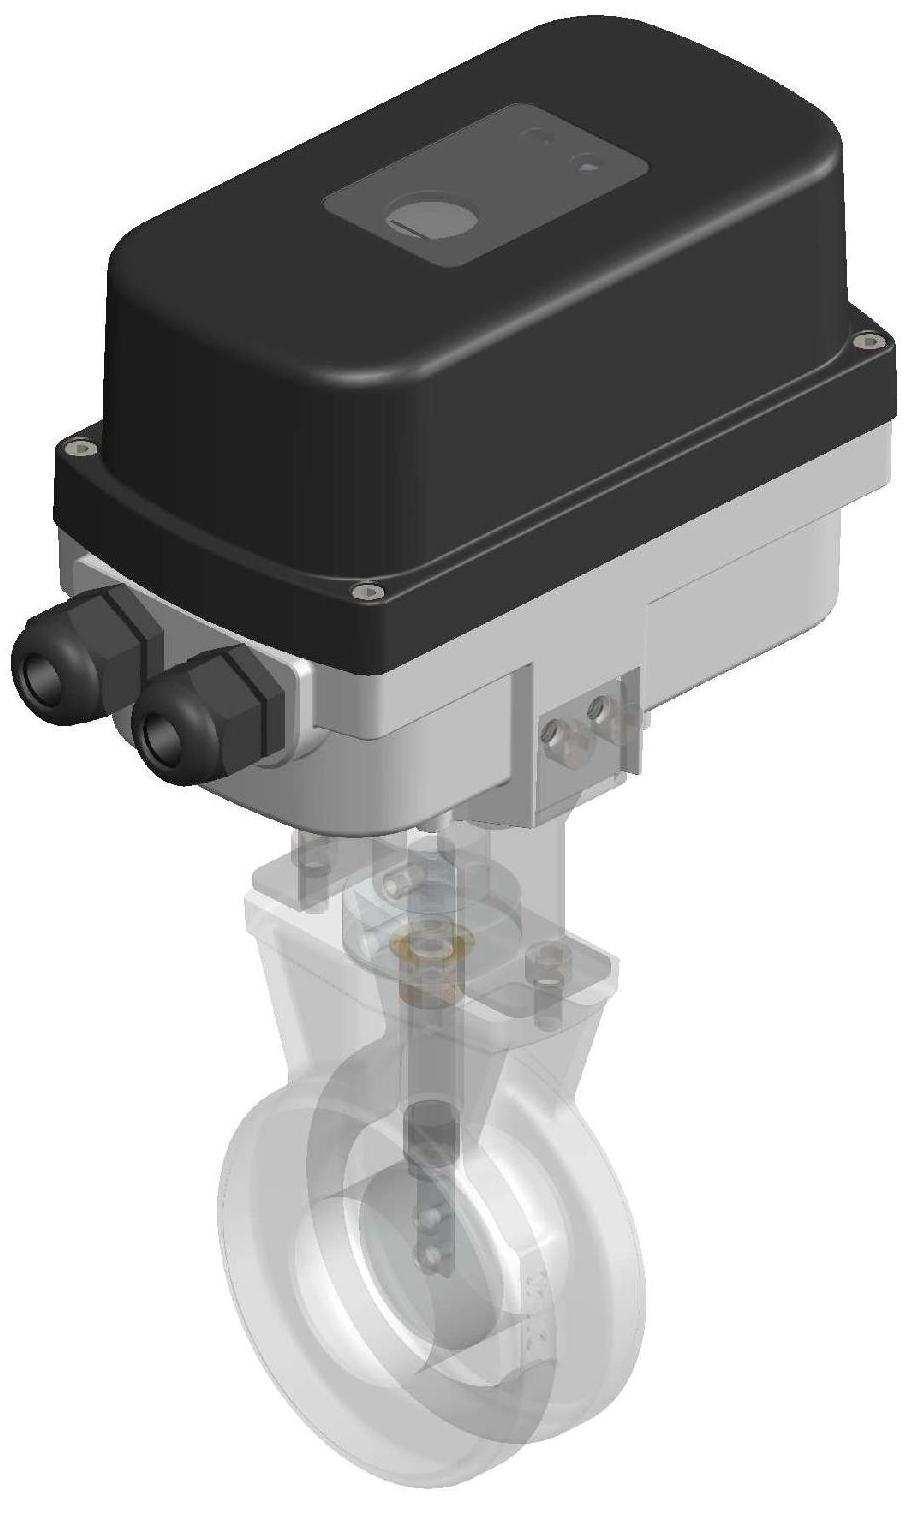 MZ Servomotor Contents Description.... 2 Features........ 2 Functioning and application..... 3 Technical specifications...... 4 Operation MZ2, MZ3... 5 Operation MZ5... 8 Product information.